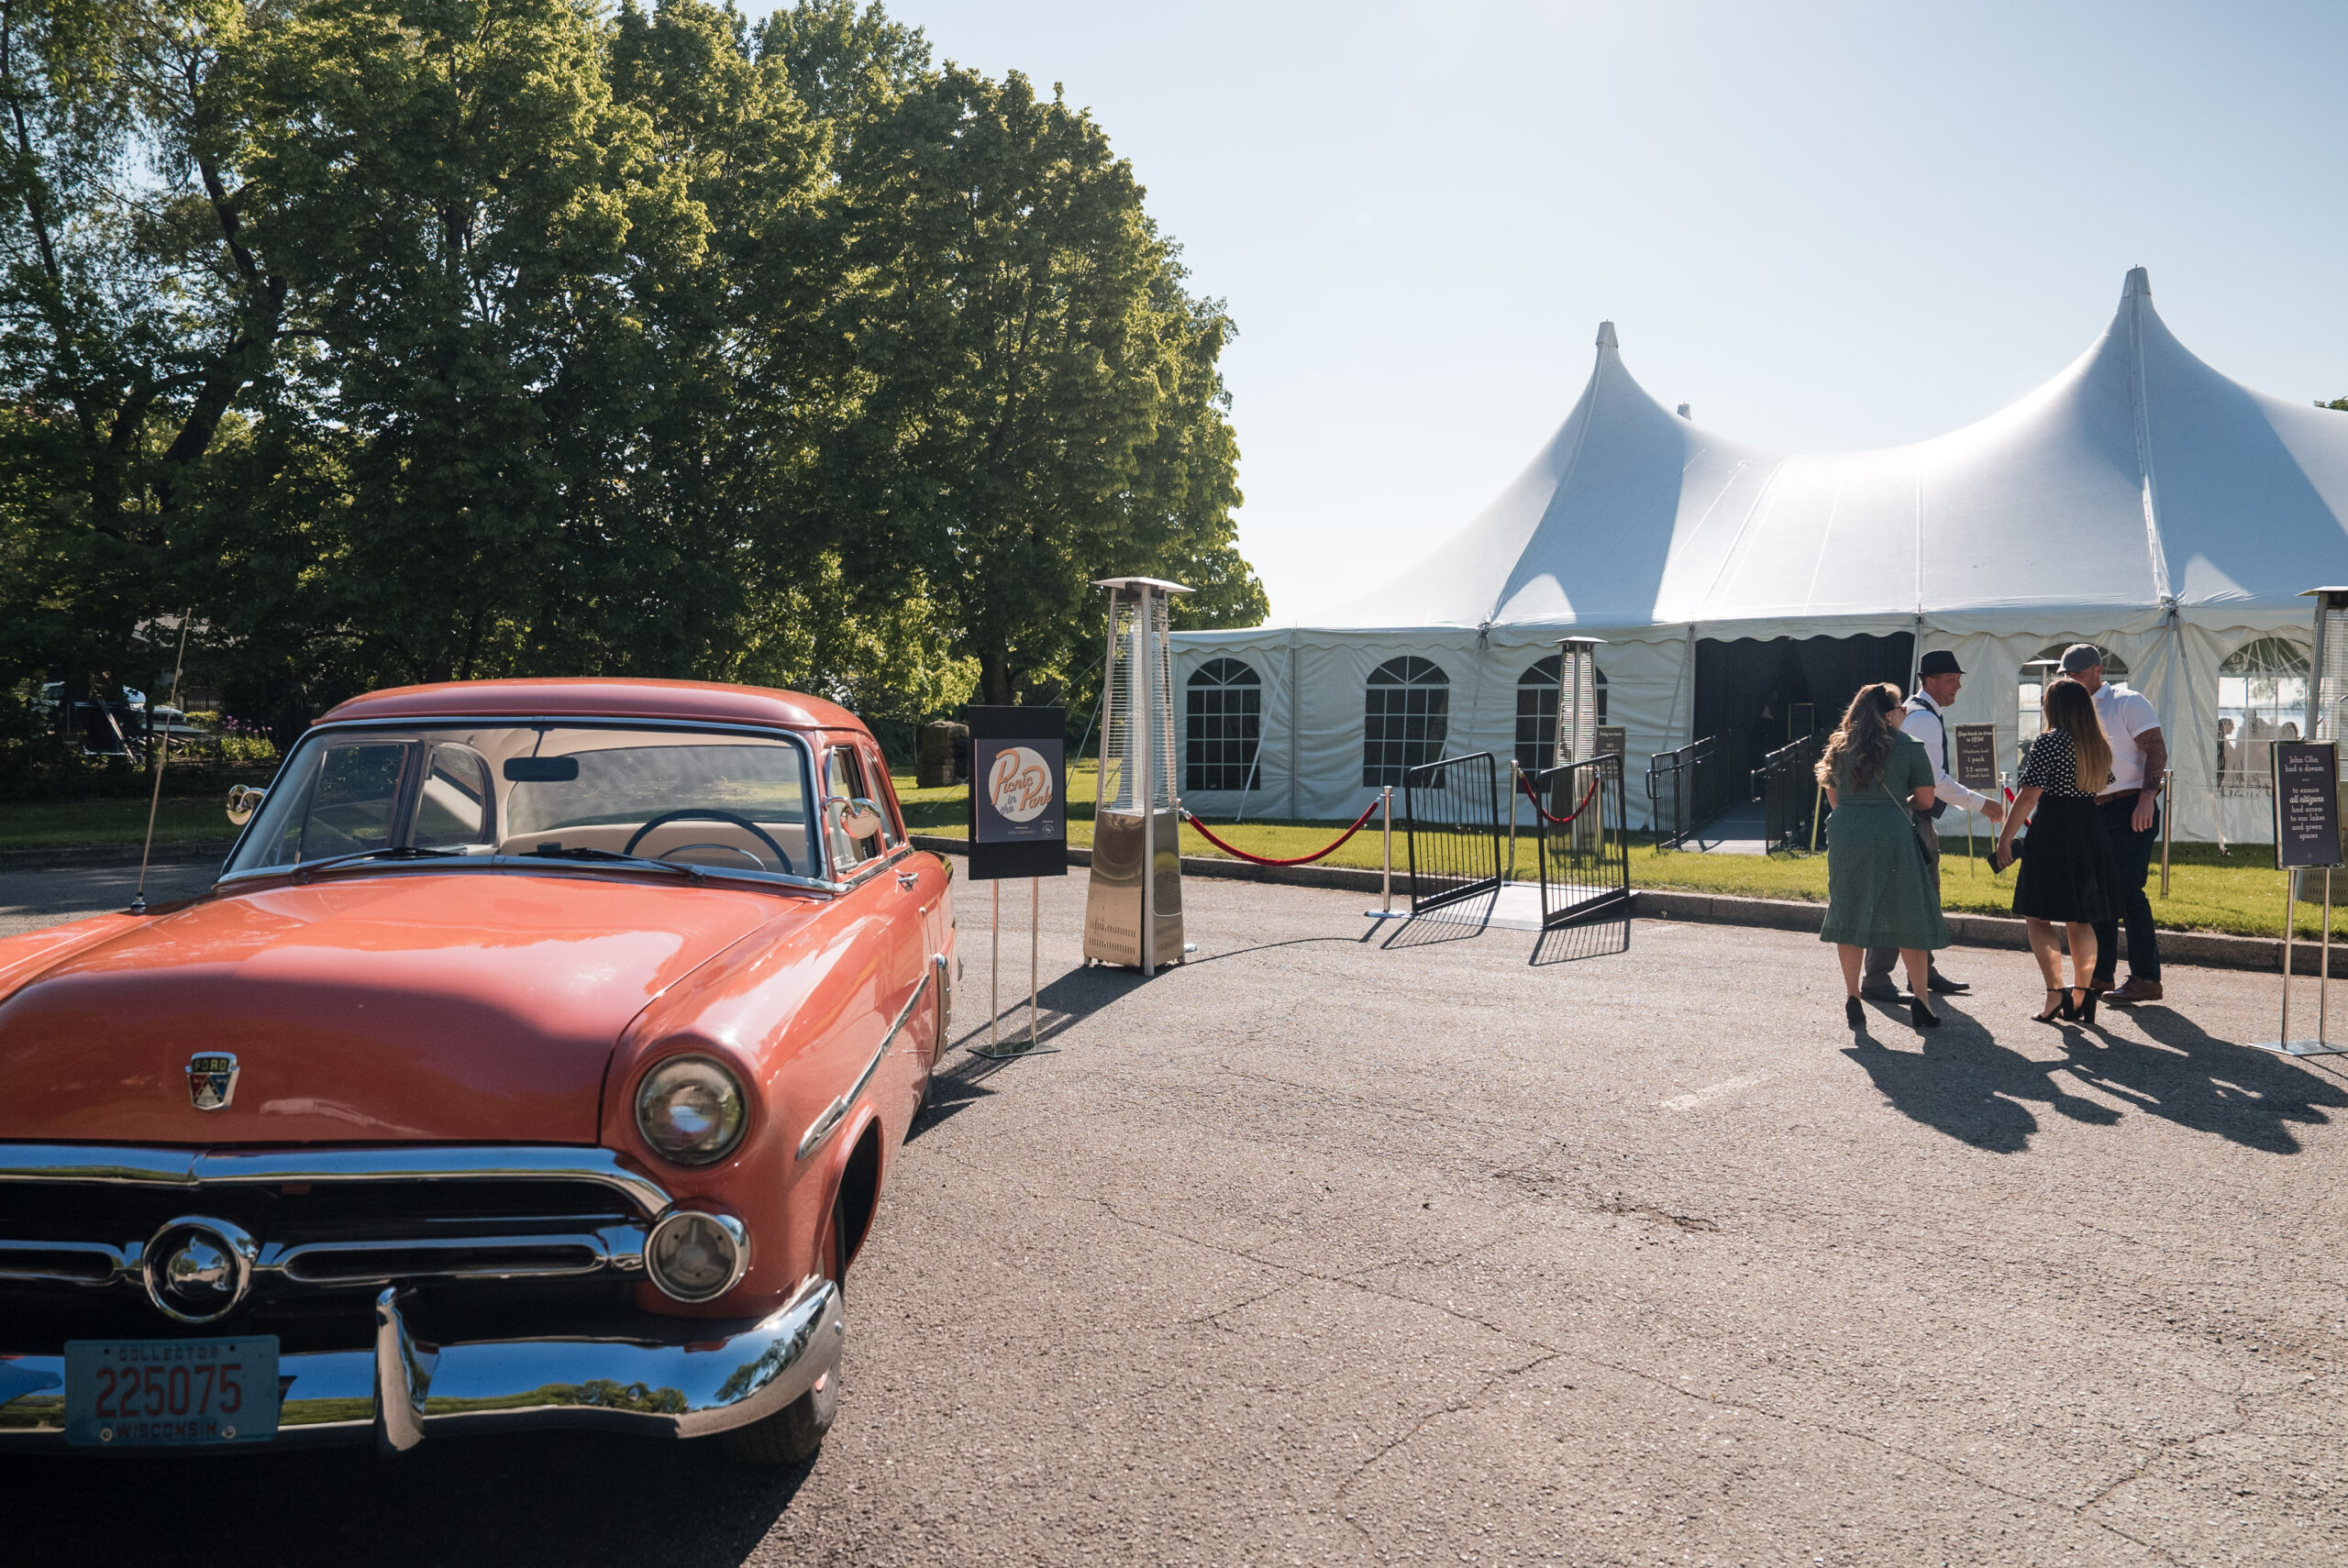 Vintage orange ford parked in front of a pole tent rental for a picnic in the park event in Madison, WI.